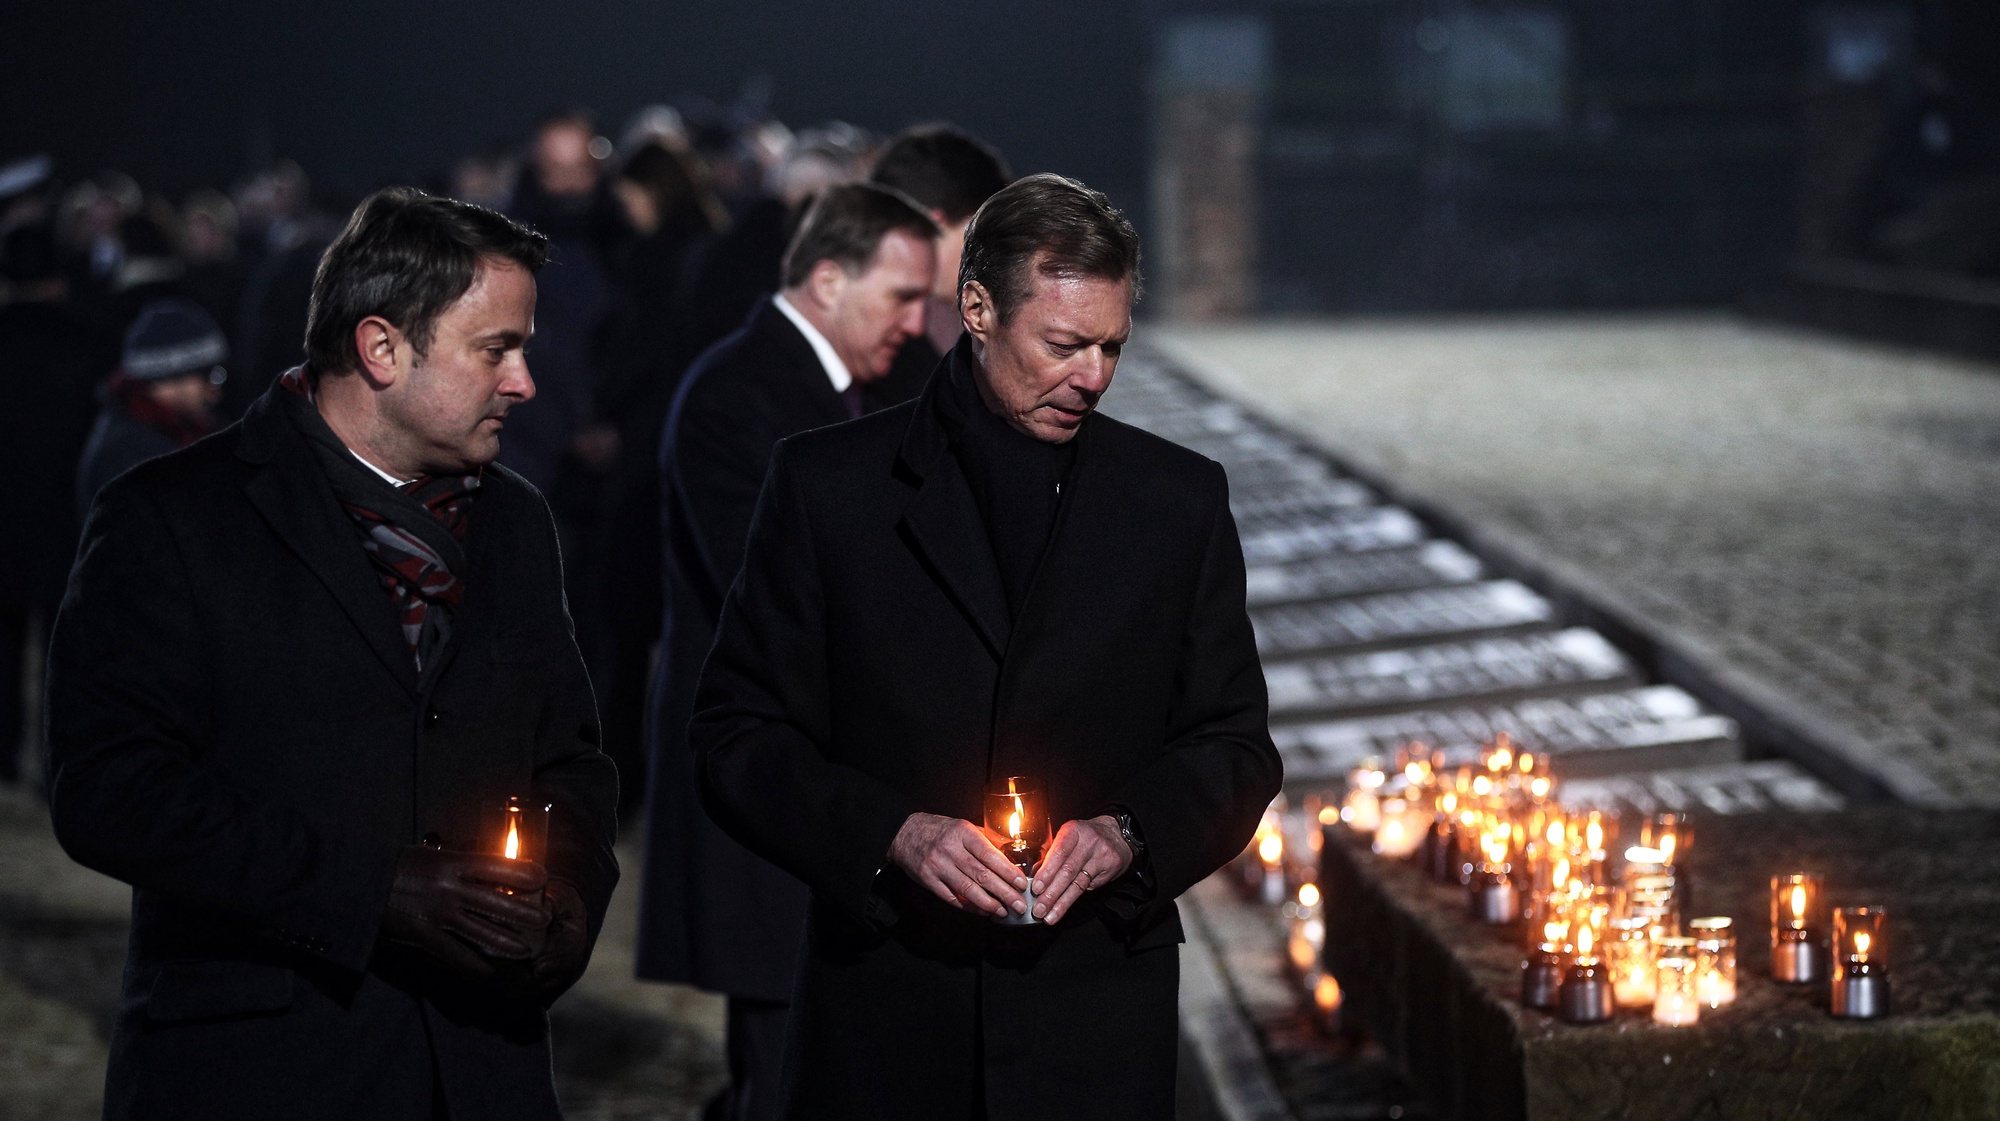 epa08170451 Grand Duke Henry of Luxembourg (R) and Prime Minister of Luxembourg Xavier Bettel (L) light candles at the International Monument to the Victims of Fascism the main commemoration ceremony at the former Auschwitz II-Birkenau camp during ceremonies marking the 75th anniversary of the liberation of the former Nazi-German concentration and extermination camp KL Auschwitz-Birkenau, in Oswiecim, Poland, 27 January 2020. The biggest German Nazi death camp KL Auschwitz-Birkenau was liberated by the Soviet Red Army on 27 January 1945. The world commemorates its liberation by International Holocaust Remembrance Day annually on 27 January.  EPA/LUKASZ GAGULSKI POLAND OUT